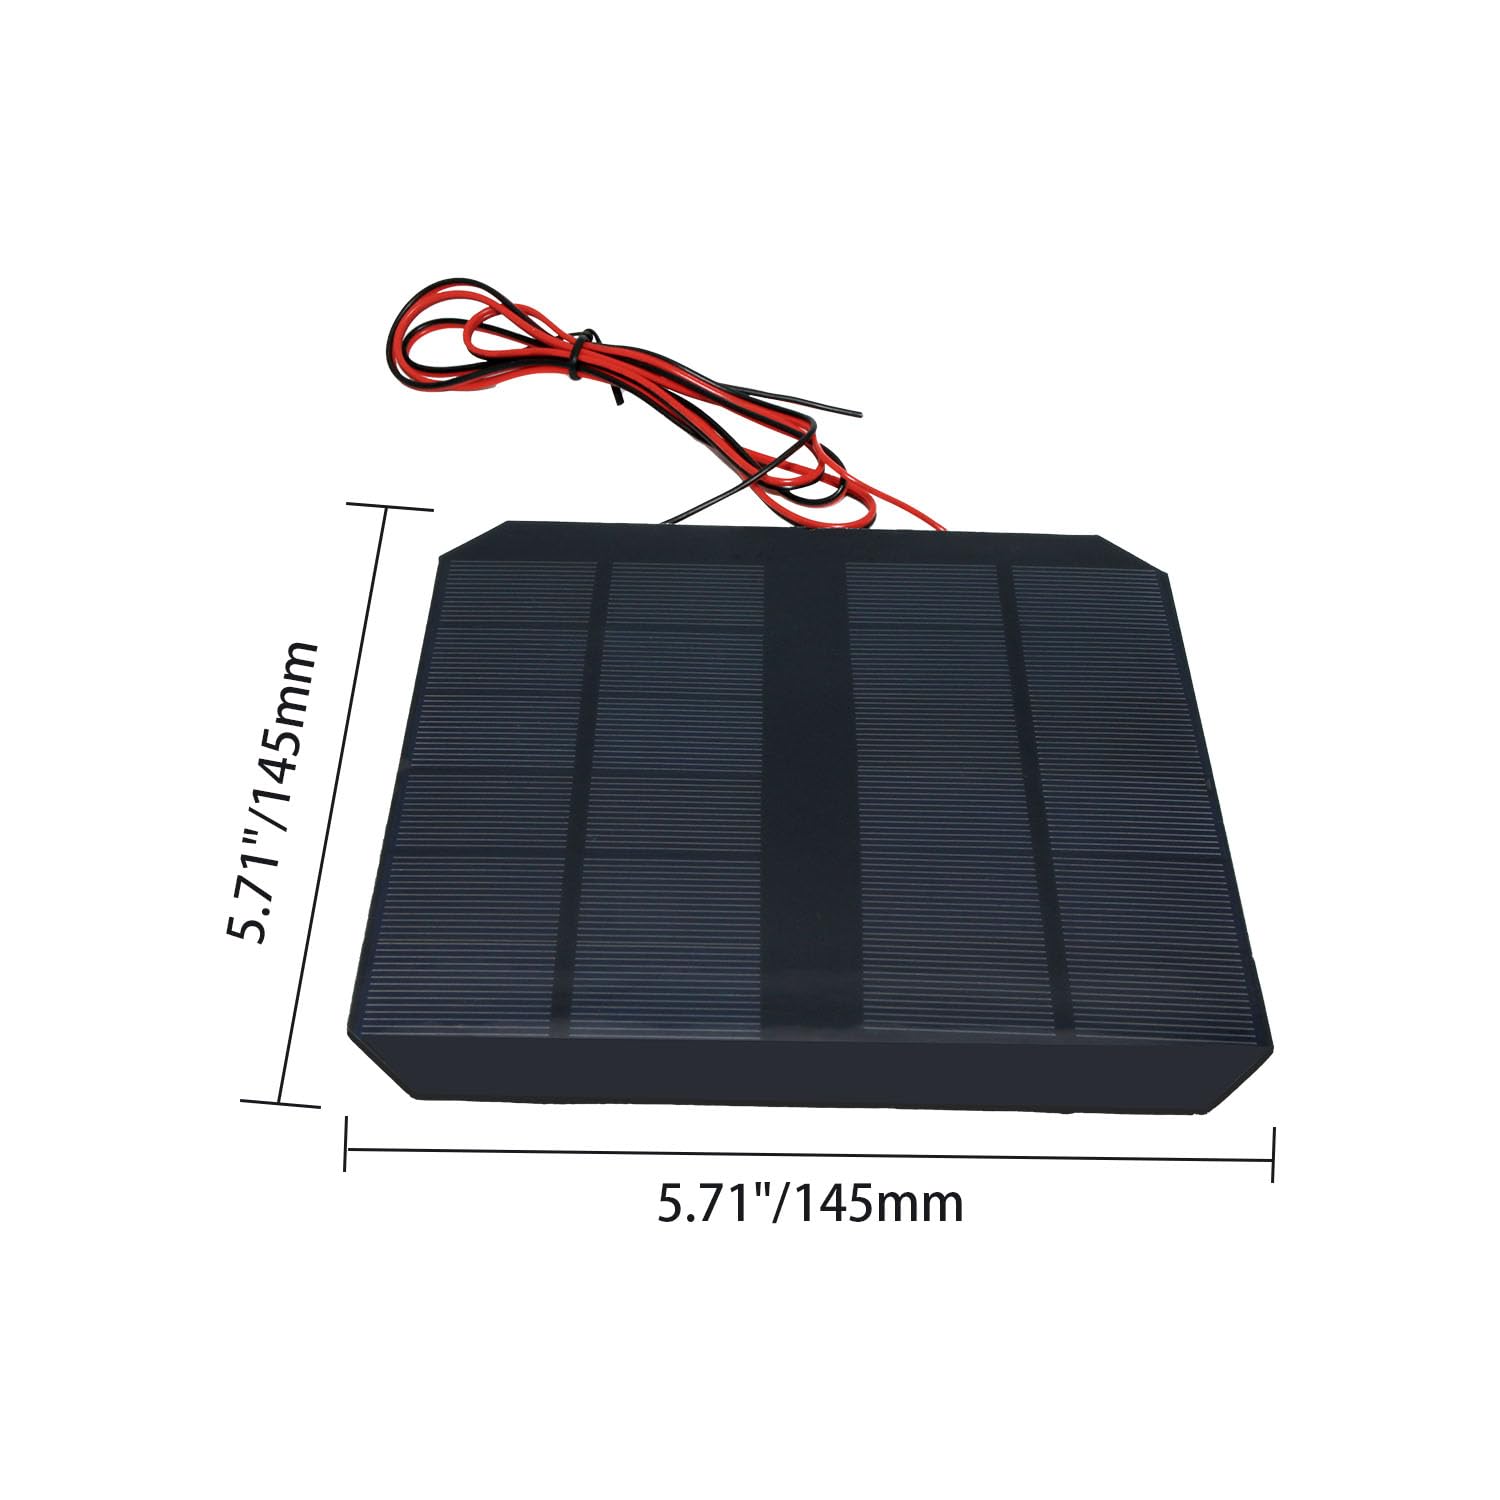 2Pcs Mini Solar Panels for Solar Power, 6V 500mA Mini Solar Panel Kit DIY Electric Toy Photovoltaic Cells Solar Epoxy Cell Charger with 1 Meter Wire 5.71"*5.71"(145mm*145mm)